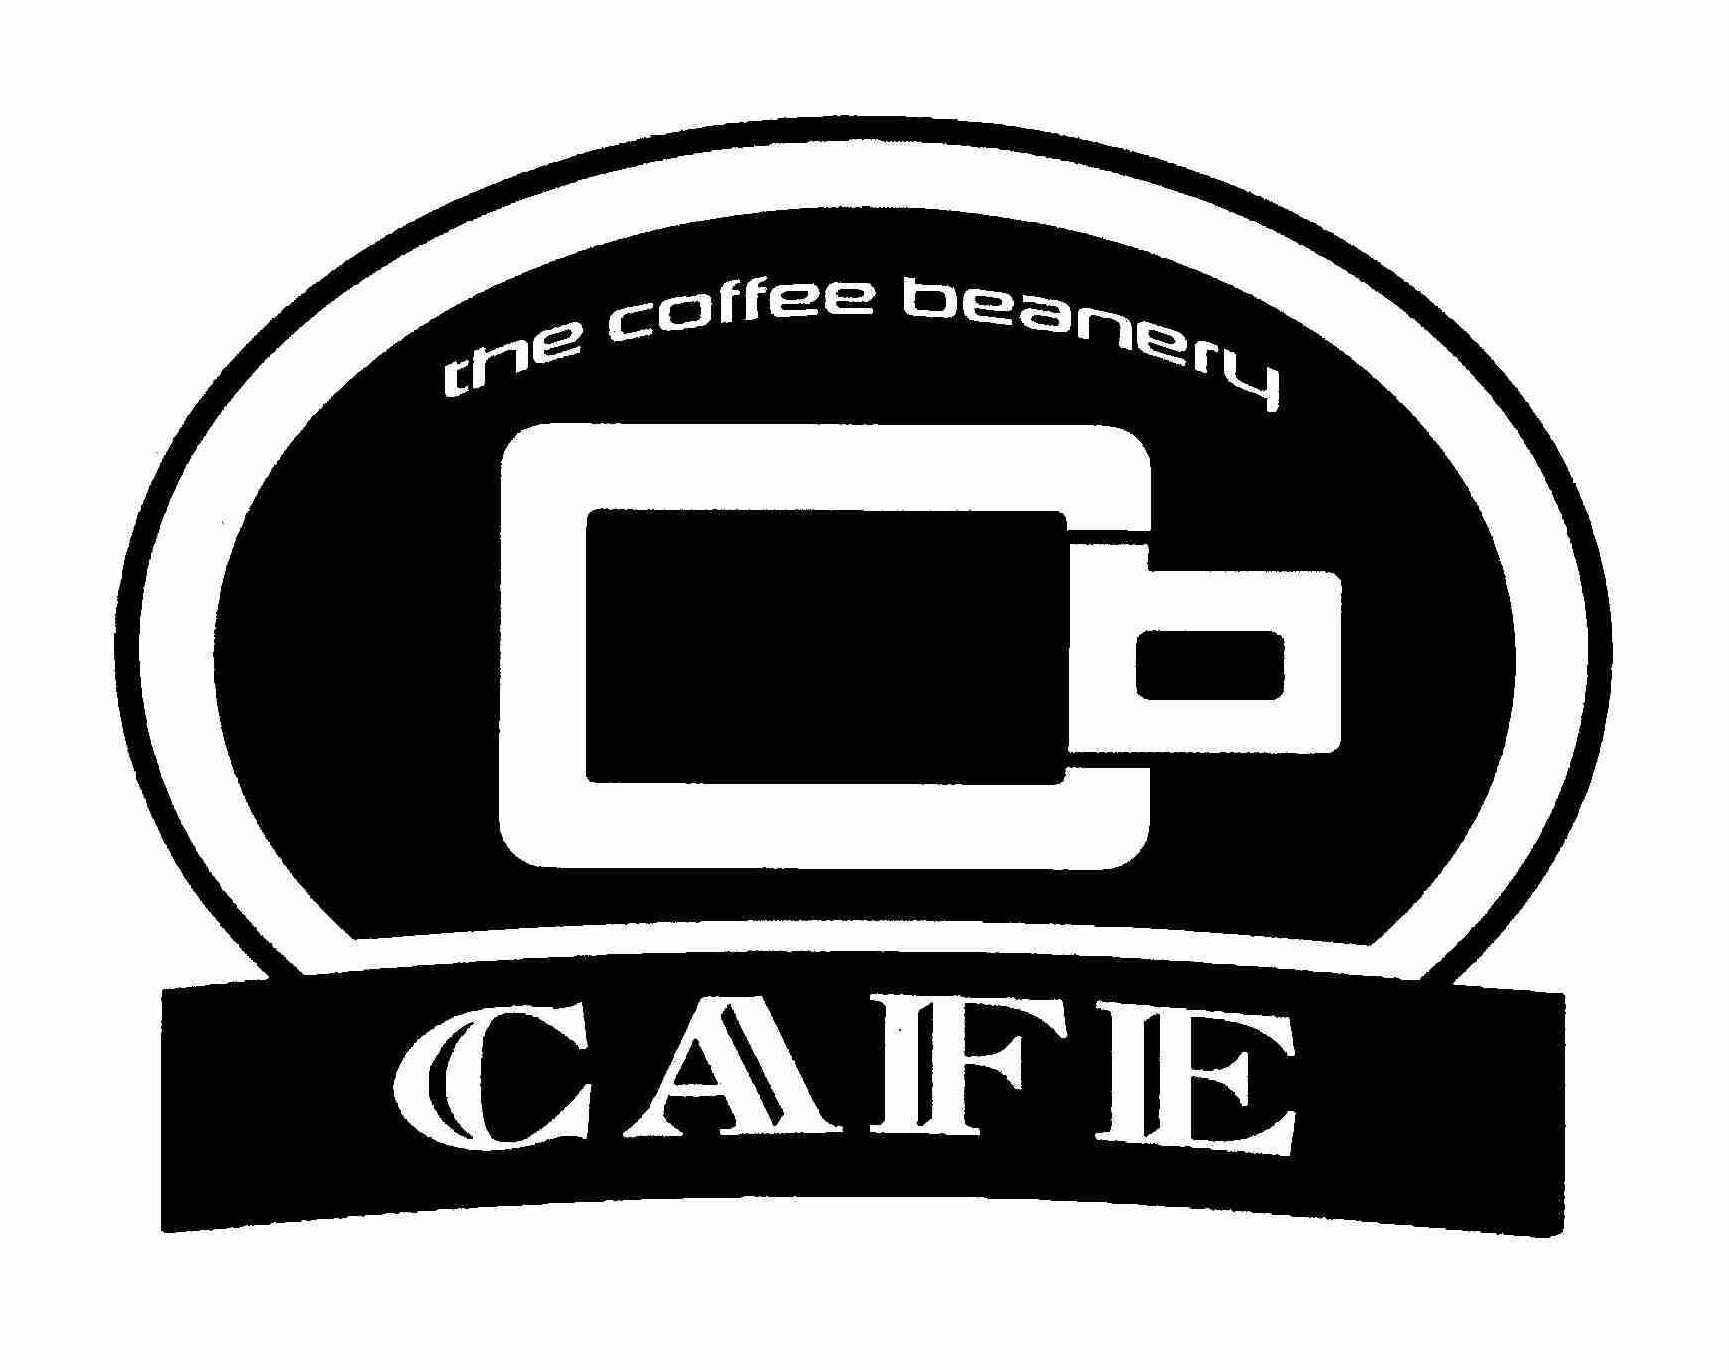  THE COFFEE BEANERY CAFE